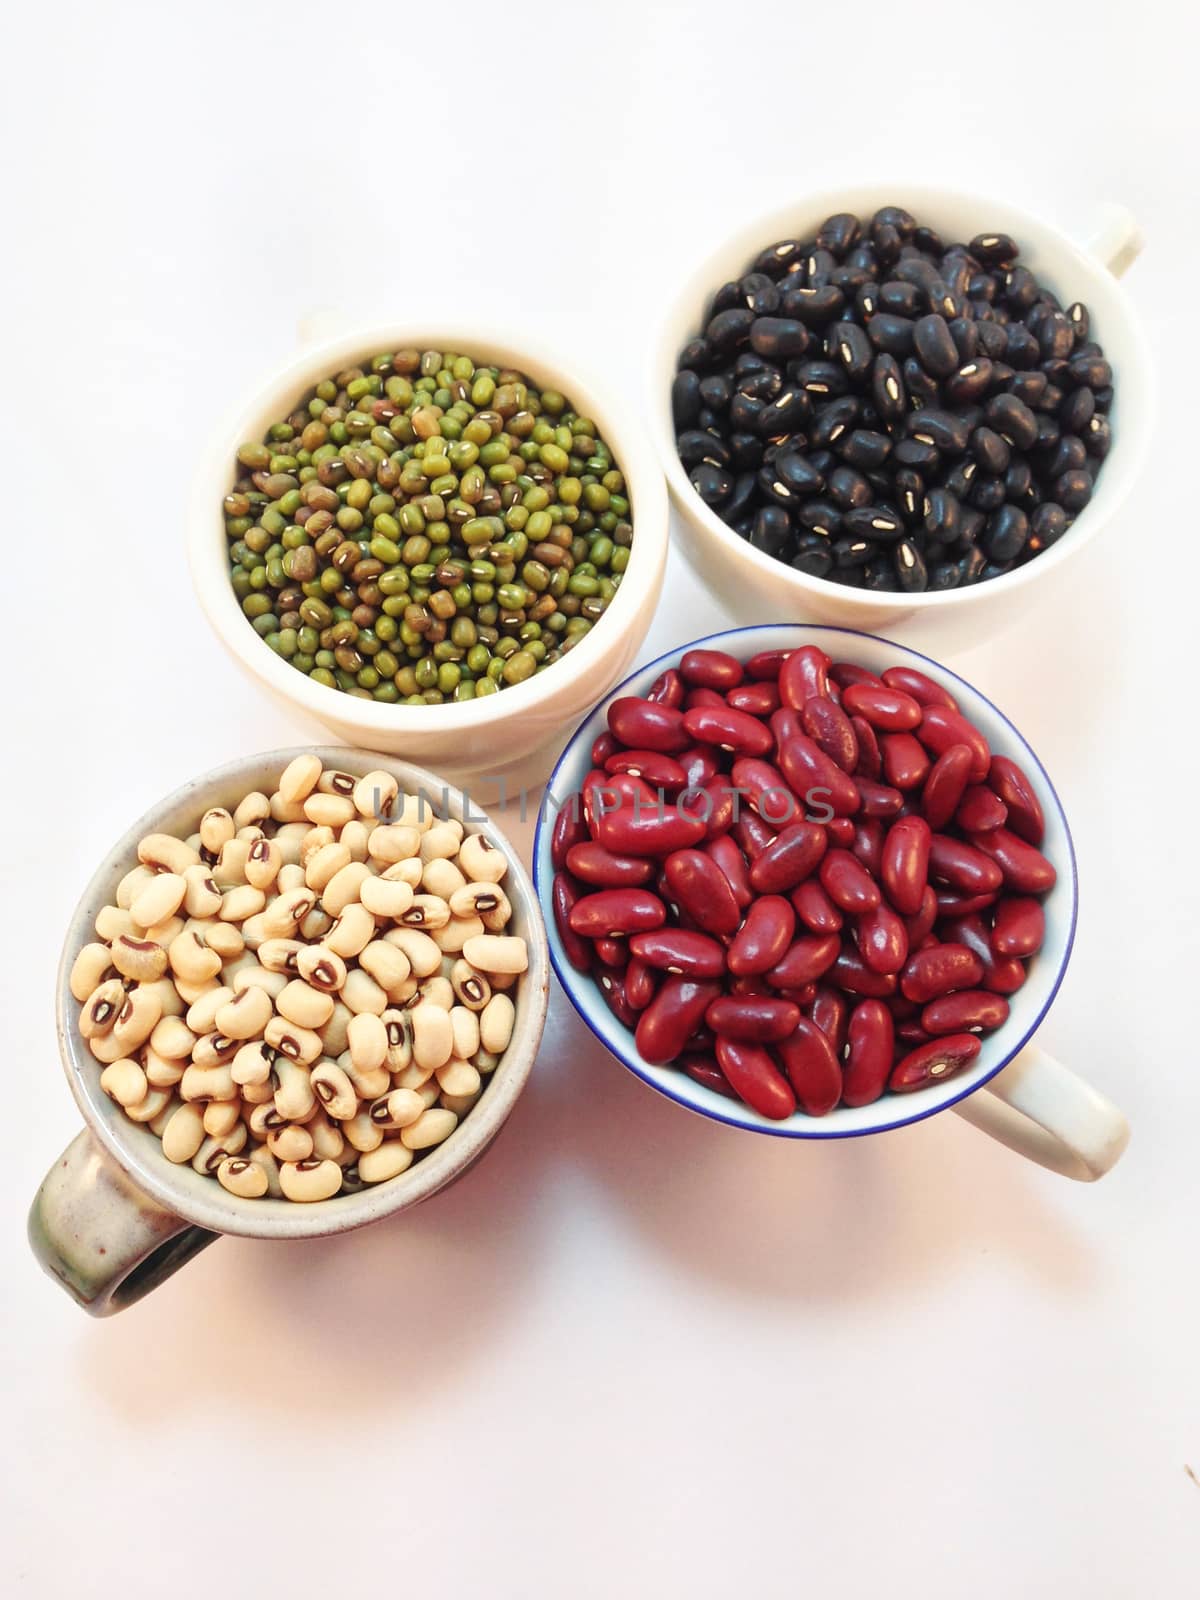 Black eye peas, mung beans, black beans and red kidney beans in  by Bowonpat